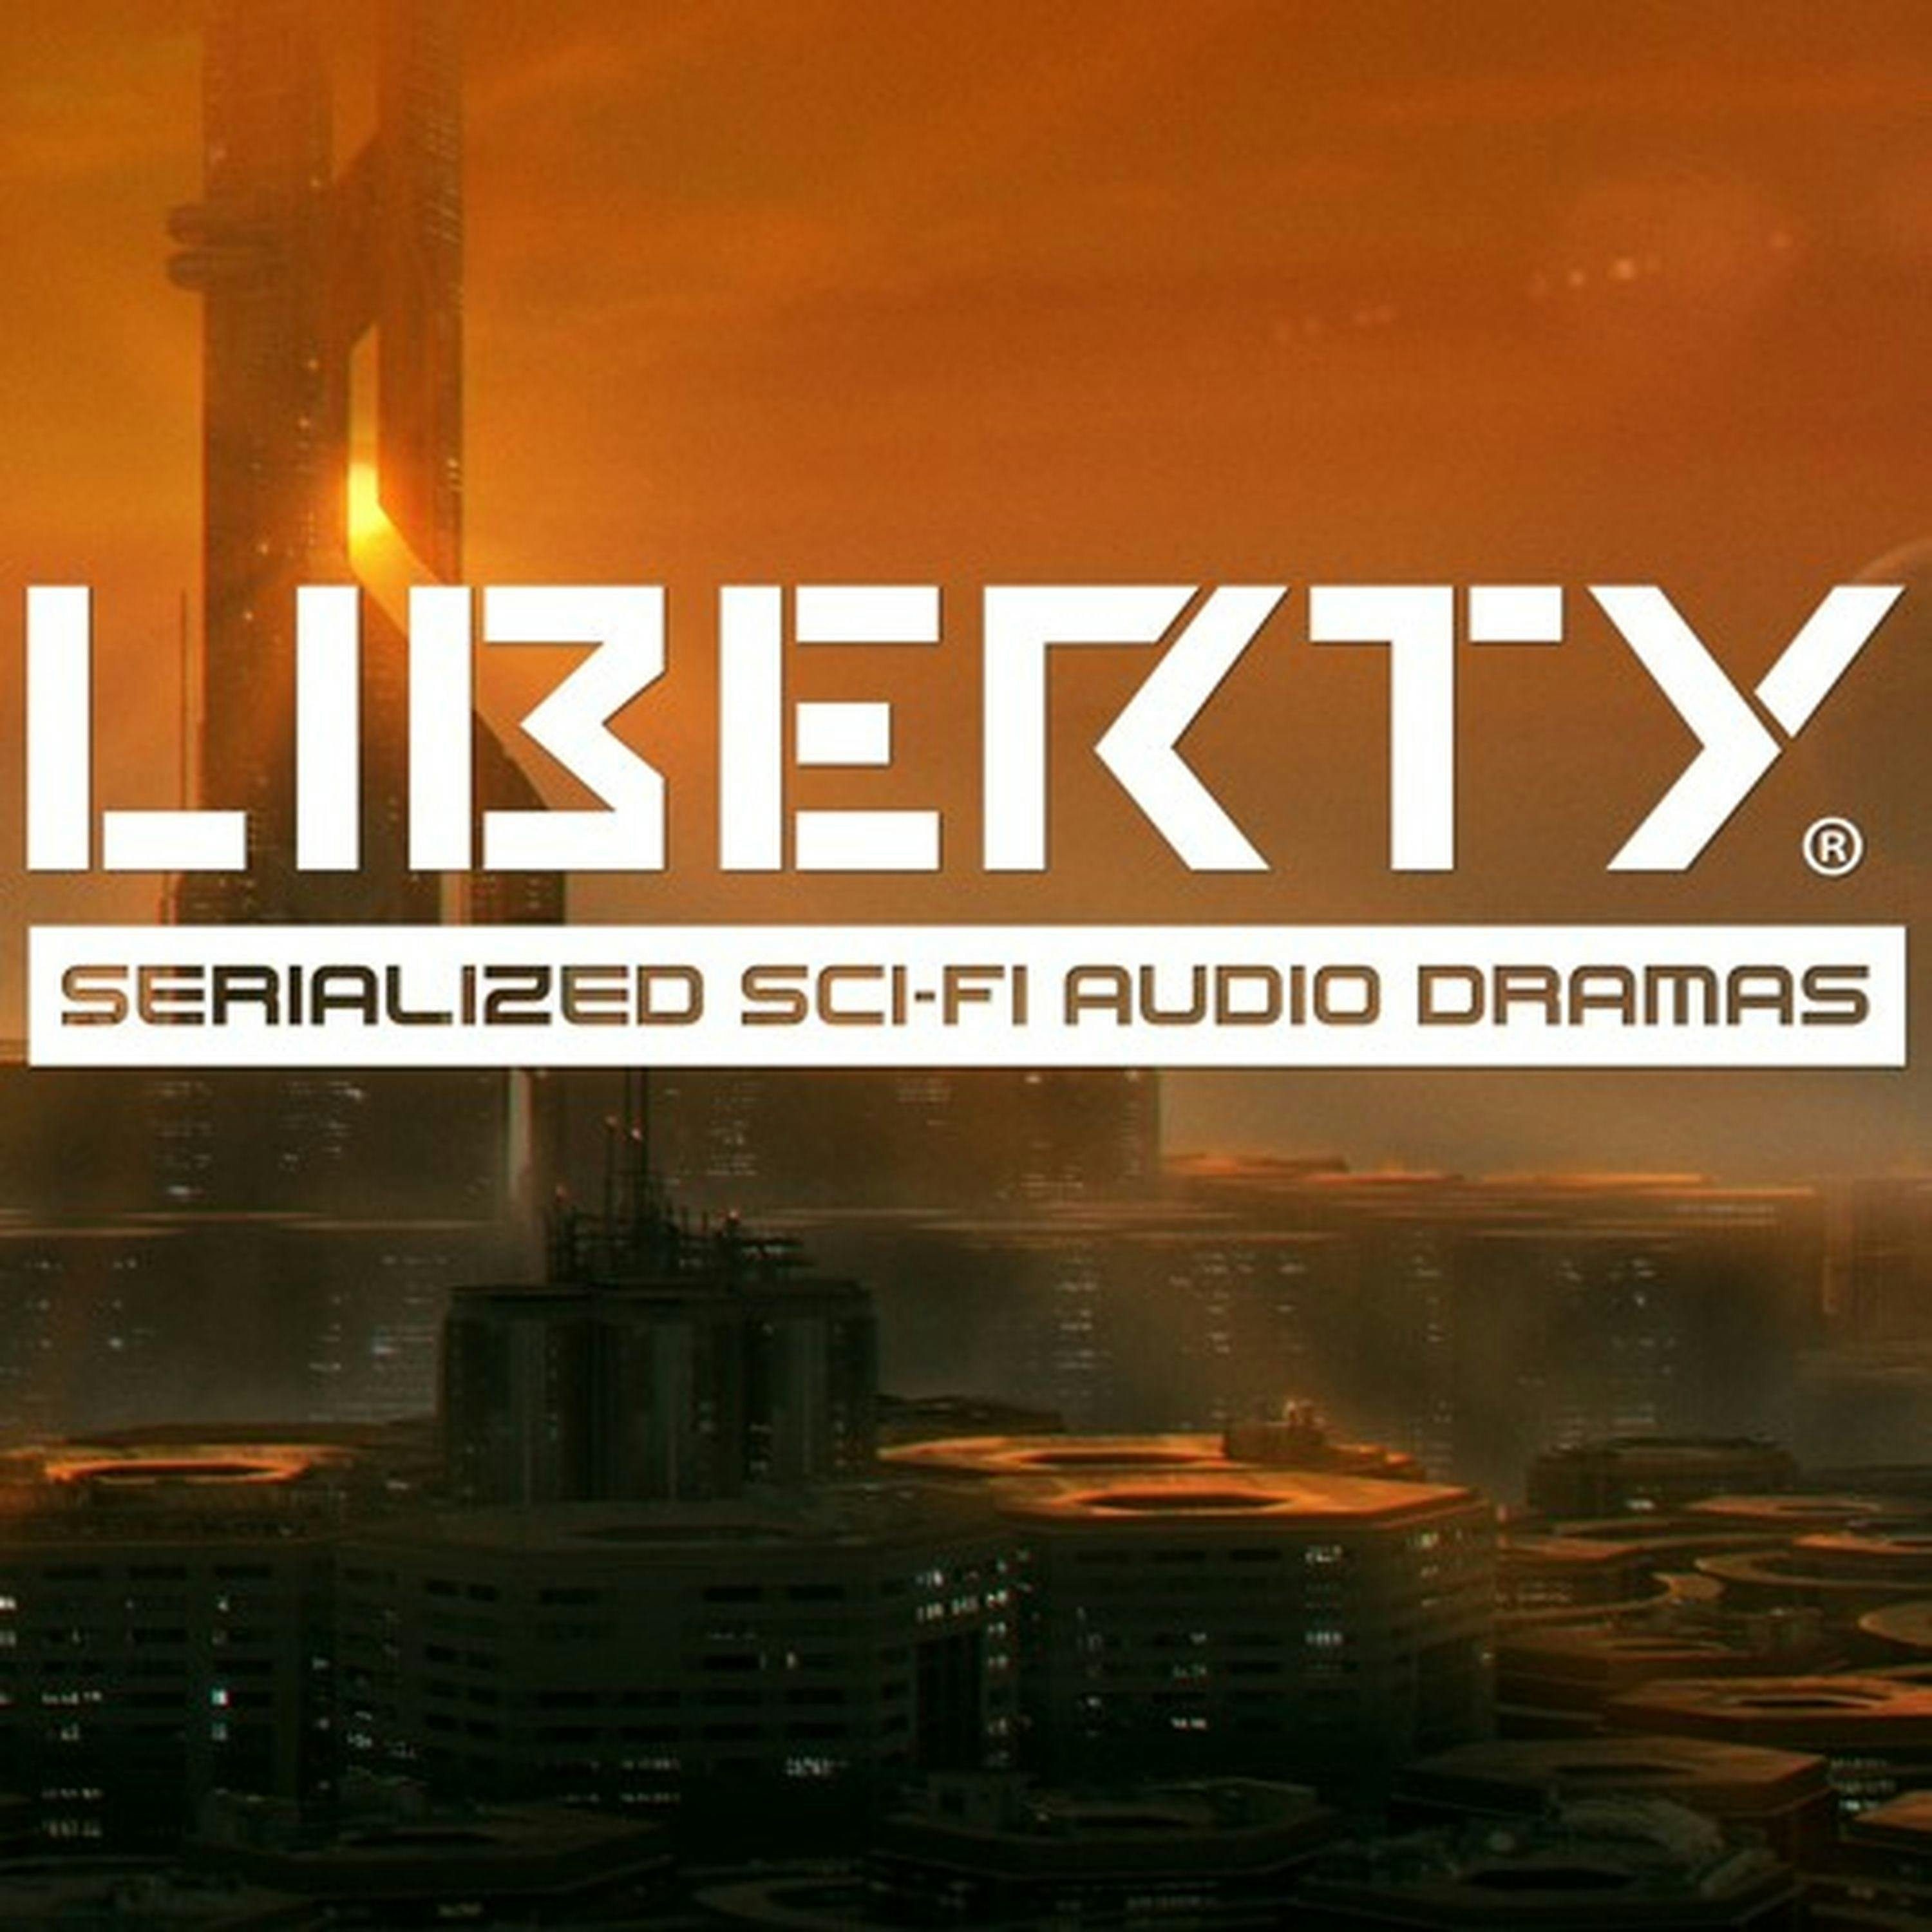 A Guide to Liberty - Serialized Sci Fi Audio Dramas